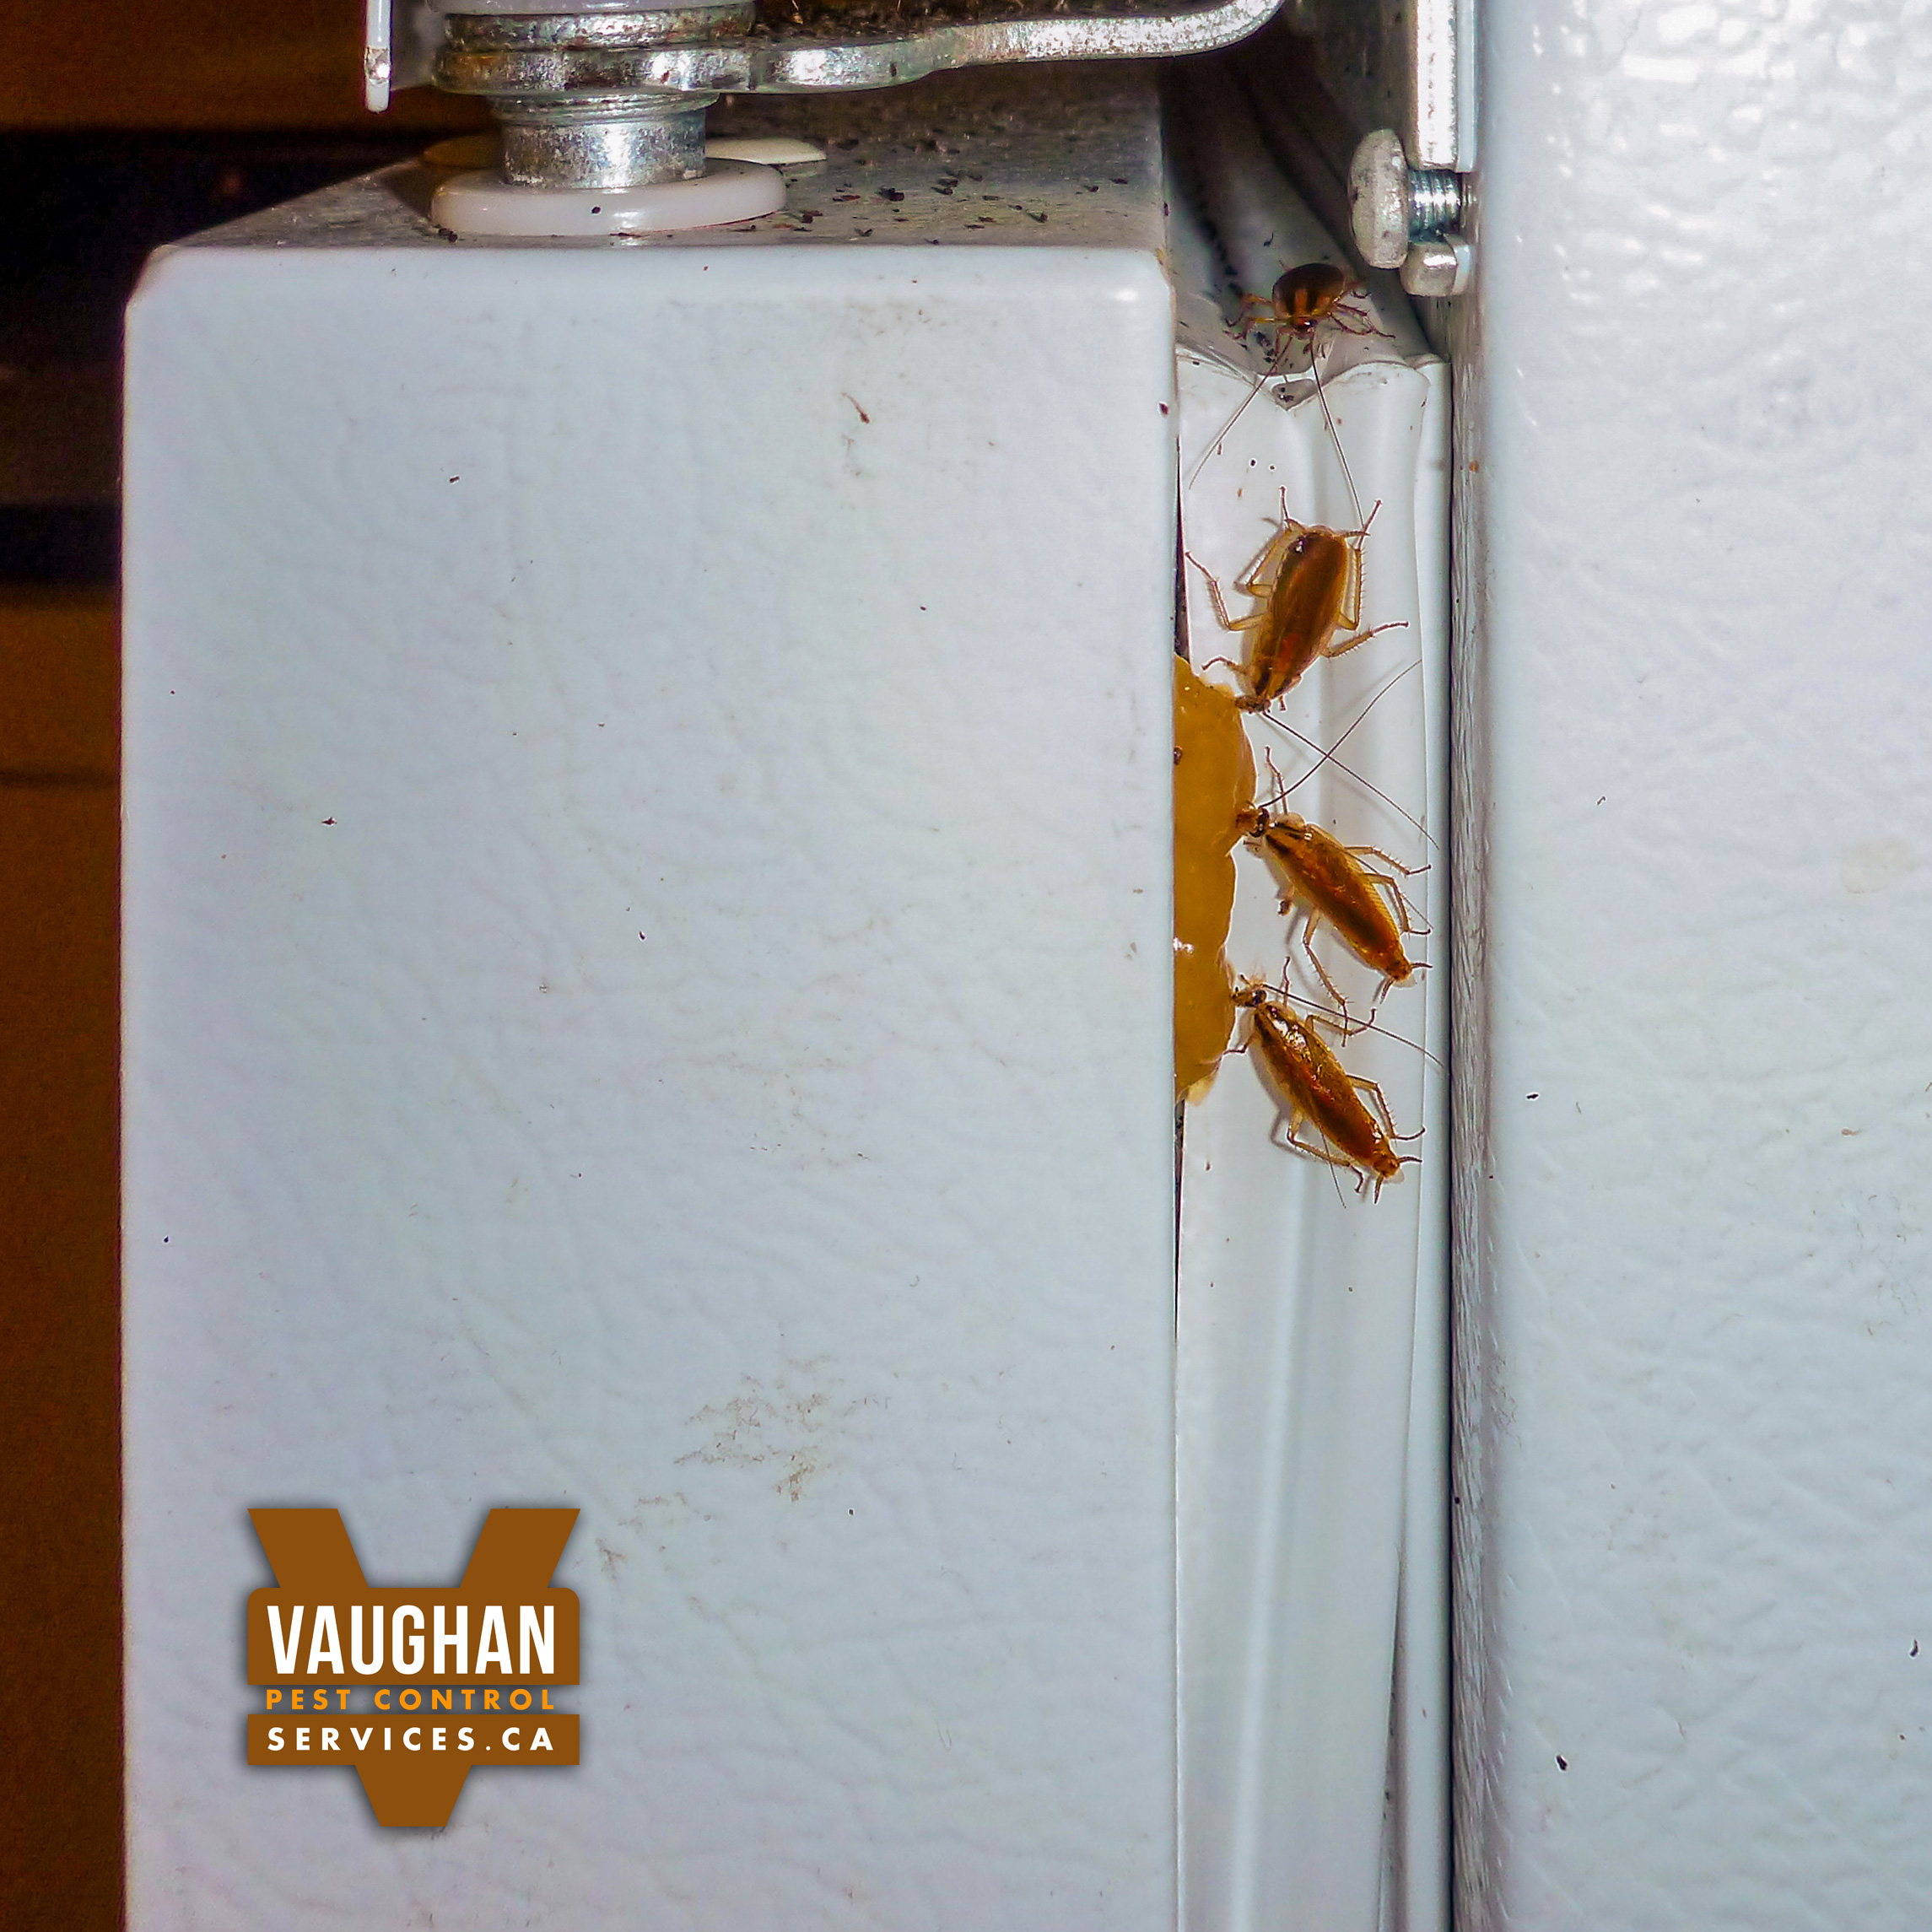 Brown-Banded Cockroaches feasting on Fatal bait in a refrigerator